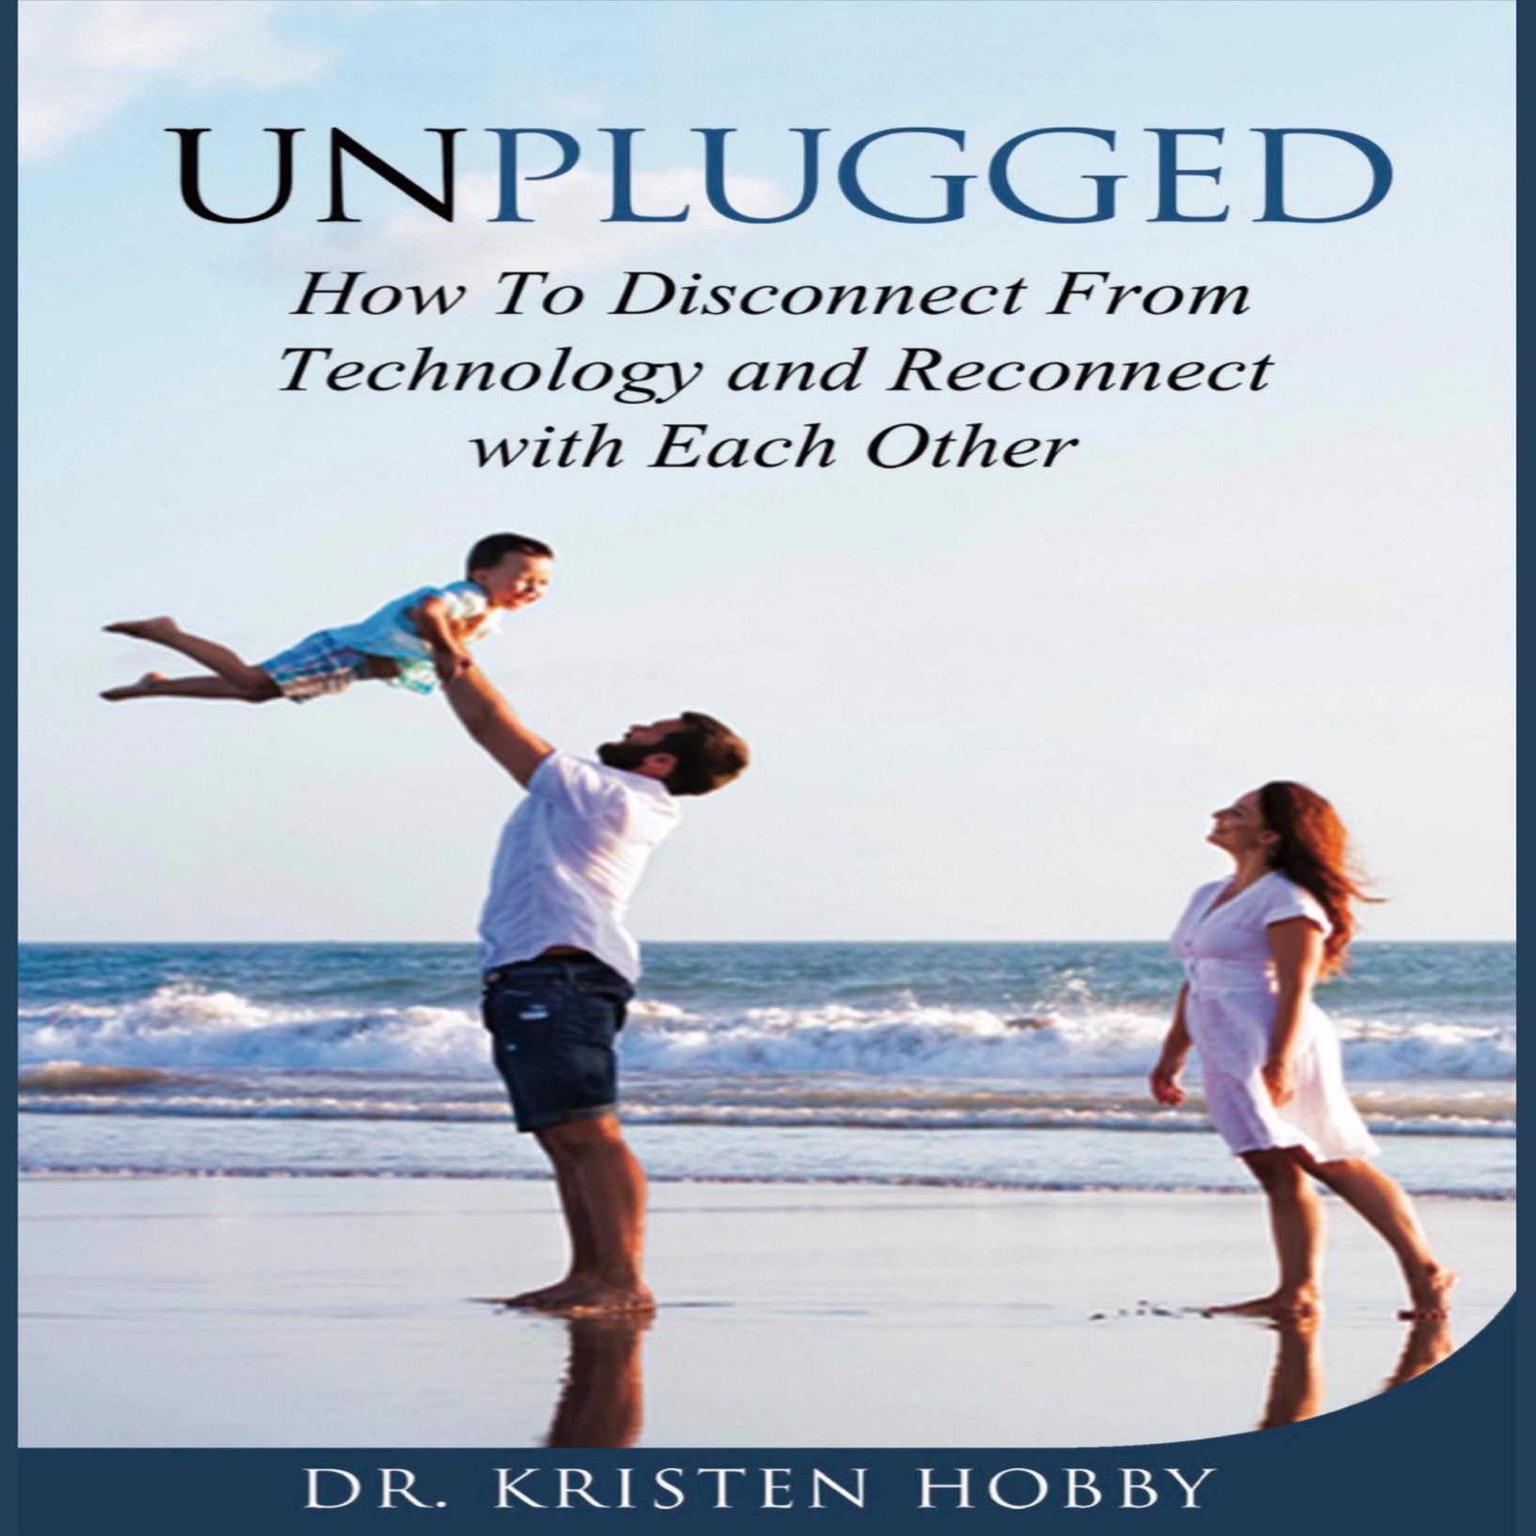 Unplugged: How to Disconnect From Technology and Reconnect with Each Other Audiobook, by Kristen Hobby